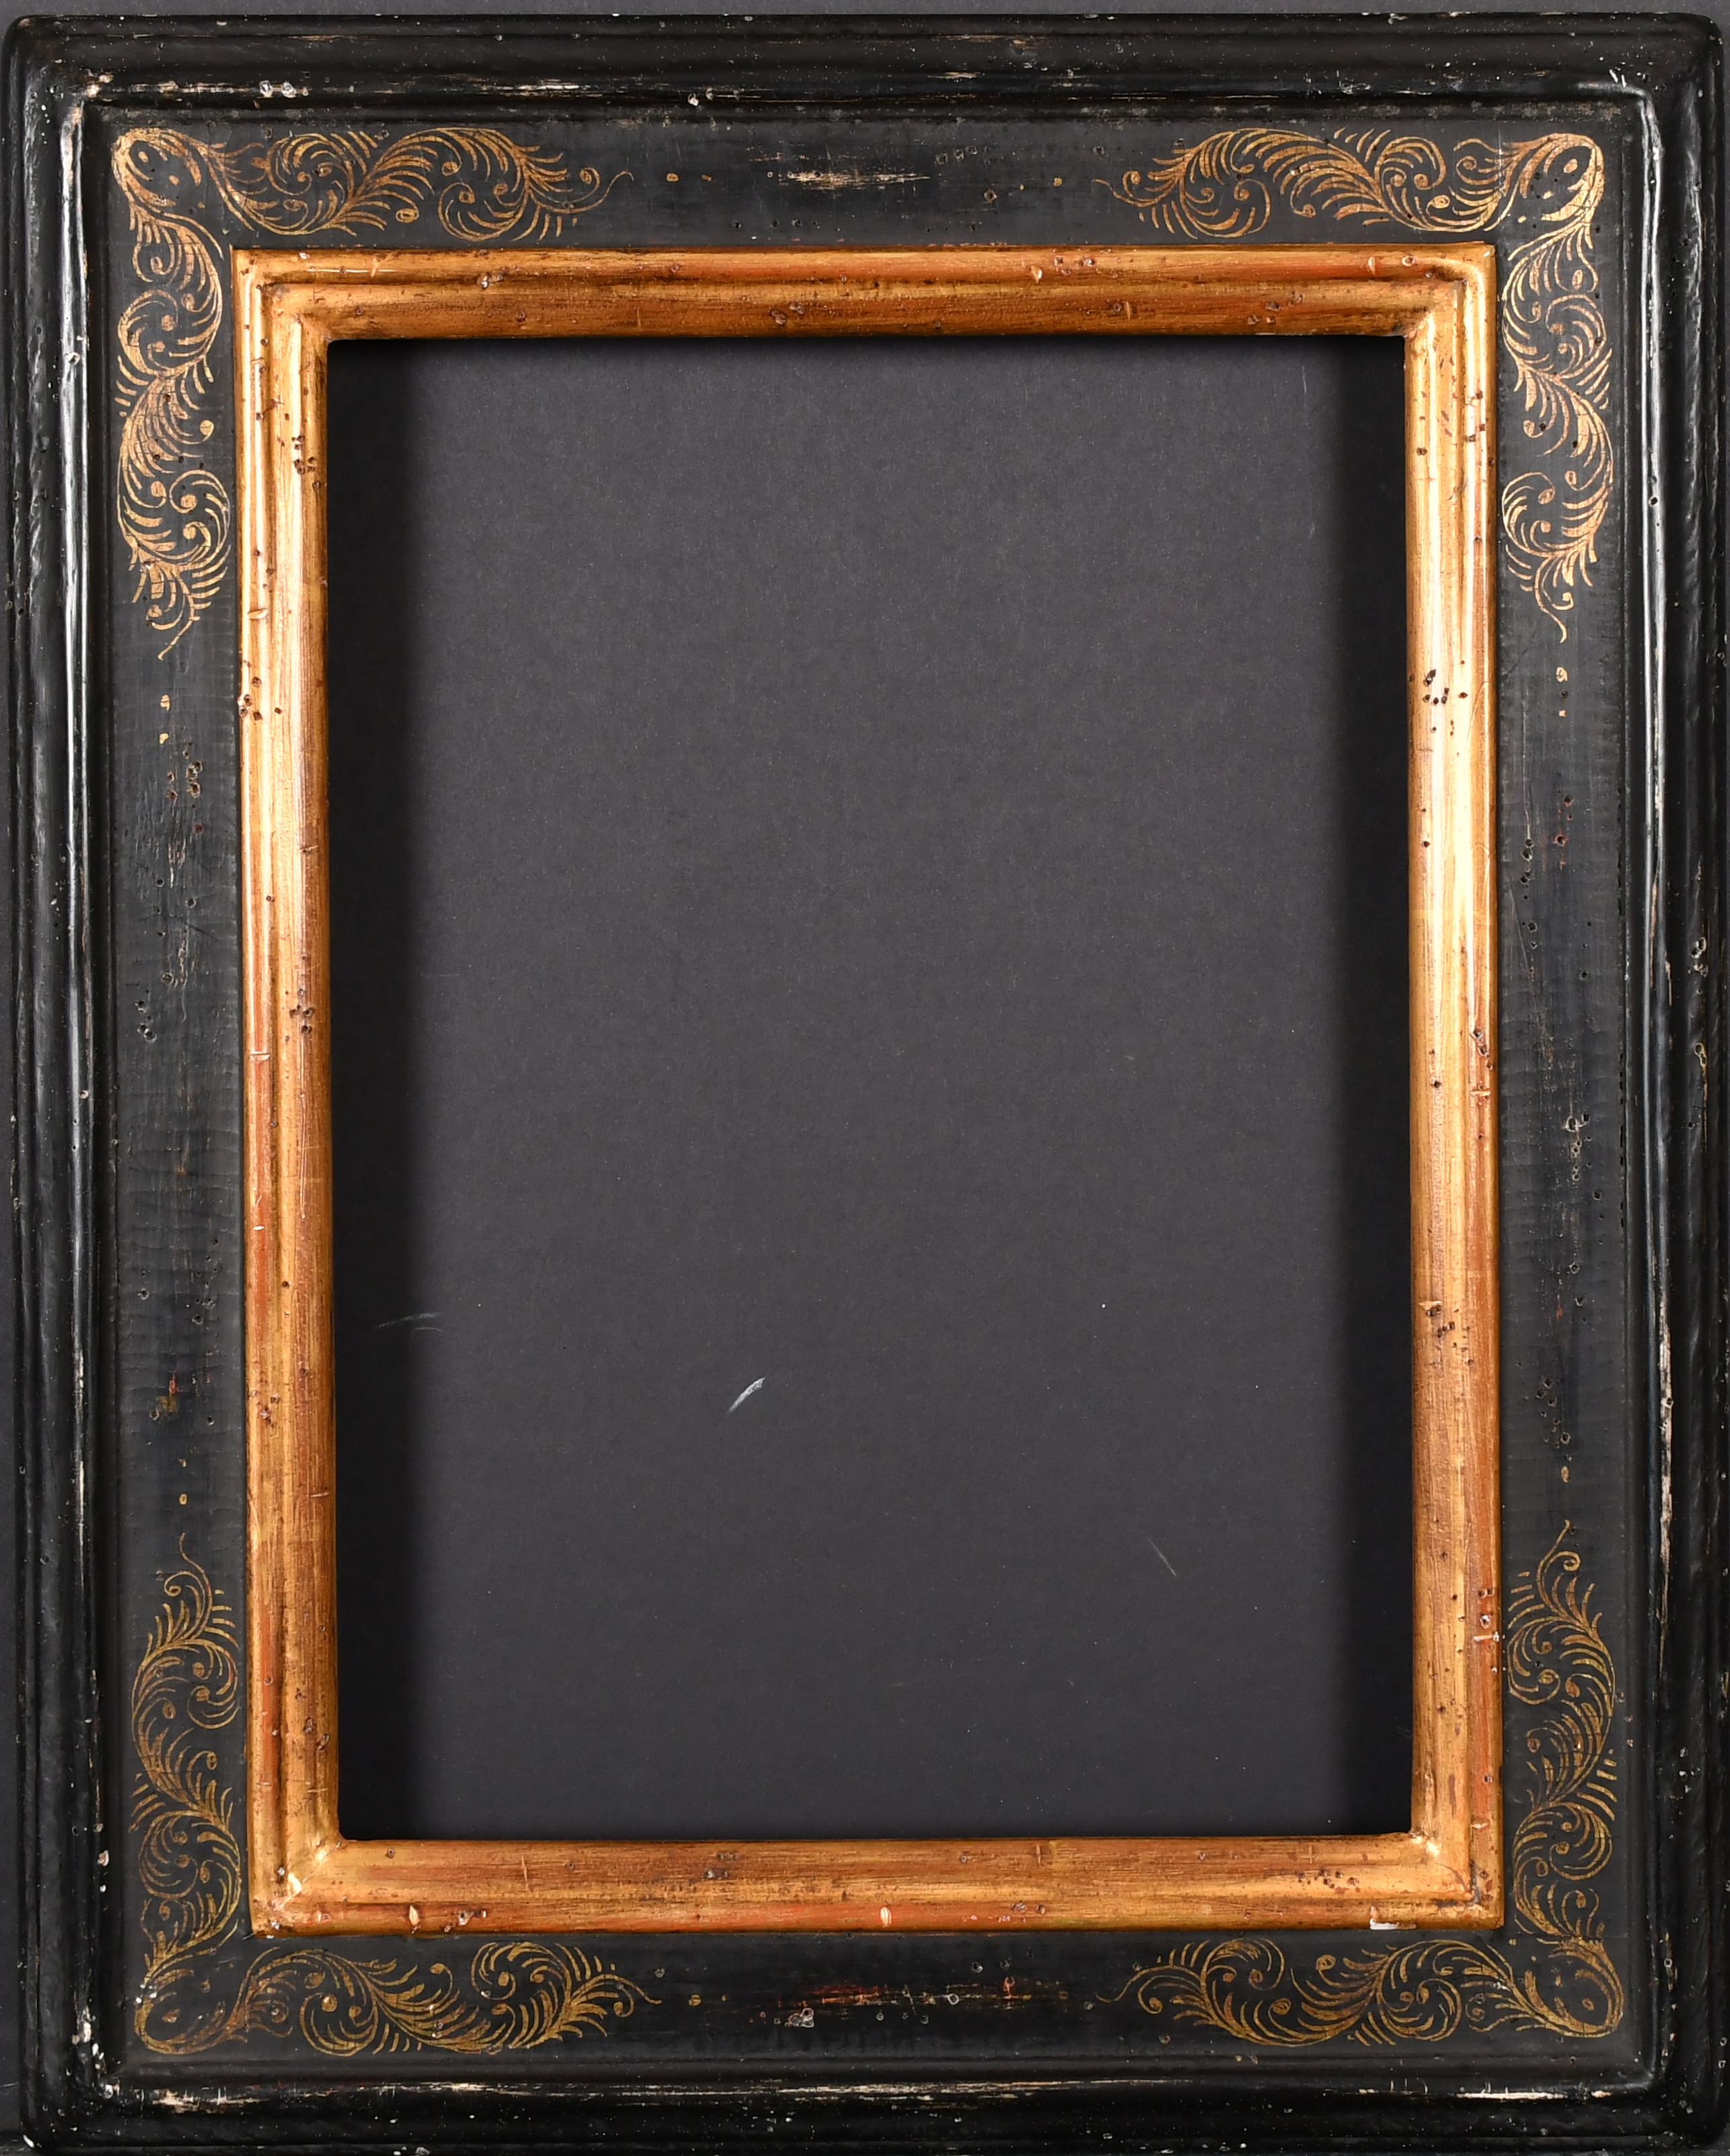 20th Century Italian School. A Black and Gilt Painted Frame, rebate 13.25" x 9.75" (33.6 x 24.7cm) - Image 2 of 3